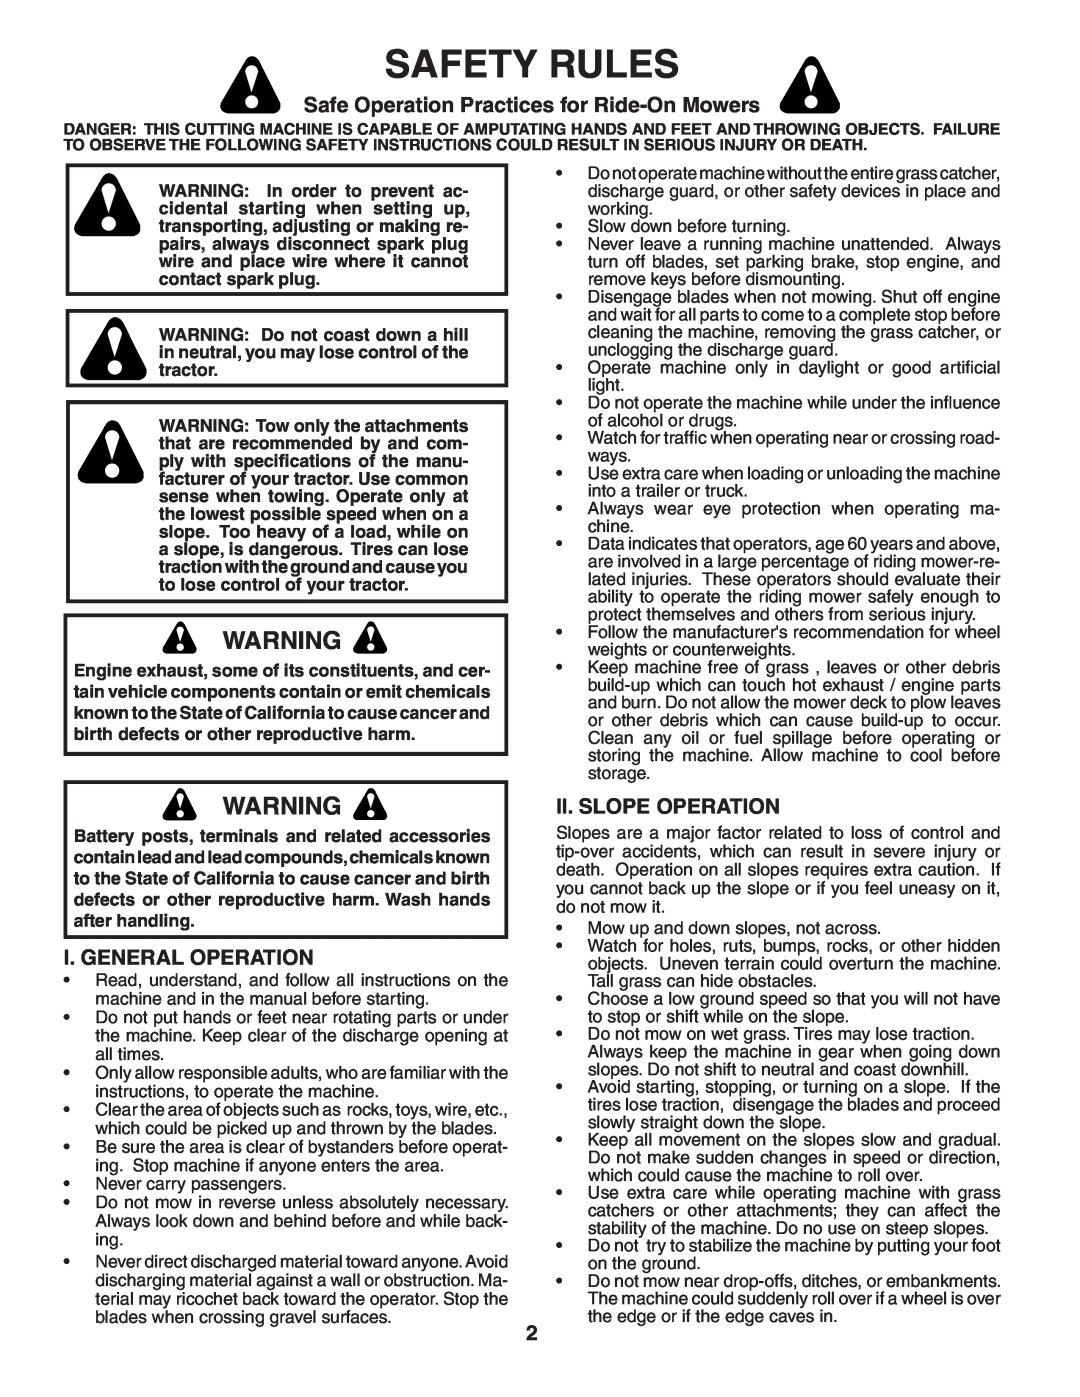 Poulan 402938 manual Safety Rules, Safe Operation Practices for Ride-On Mowers, I. General Operation, Ii. Slope Operation 